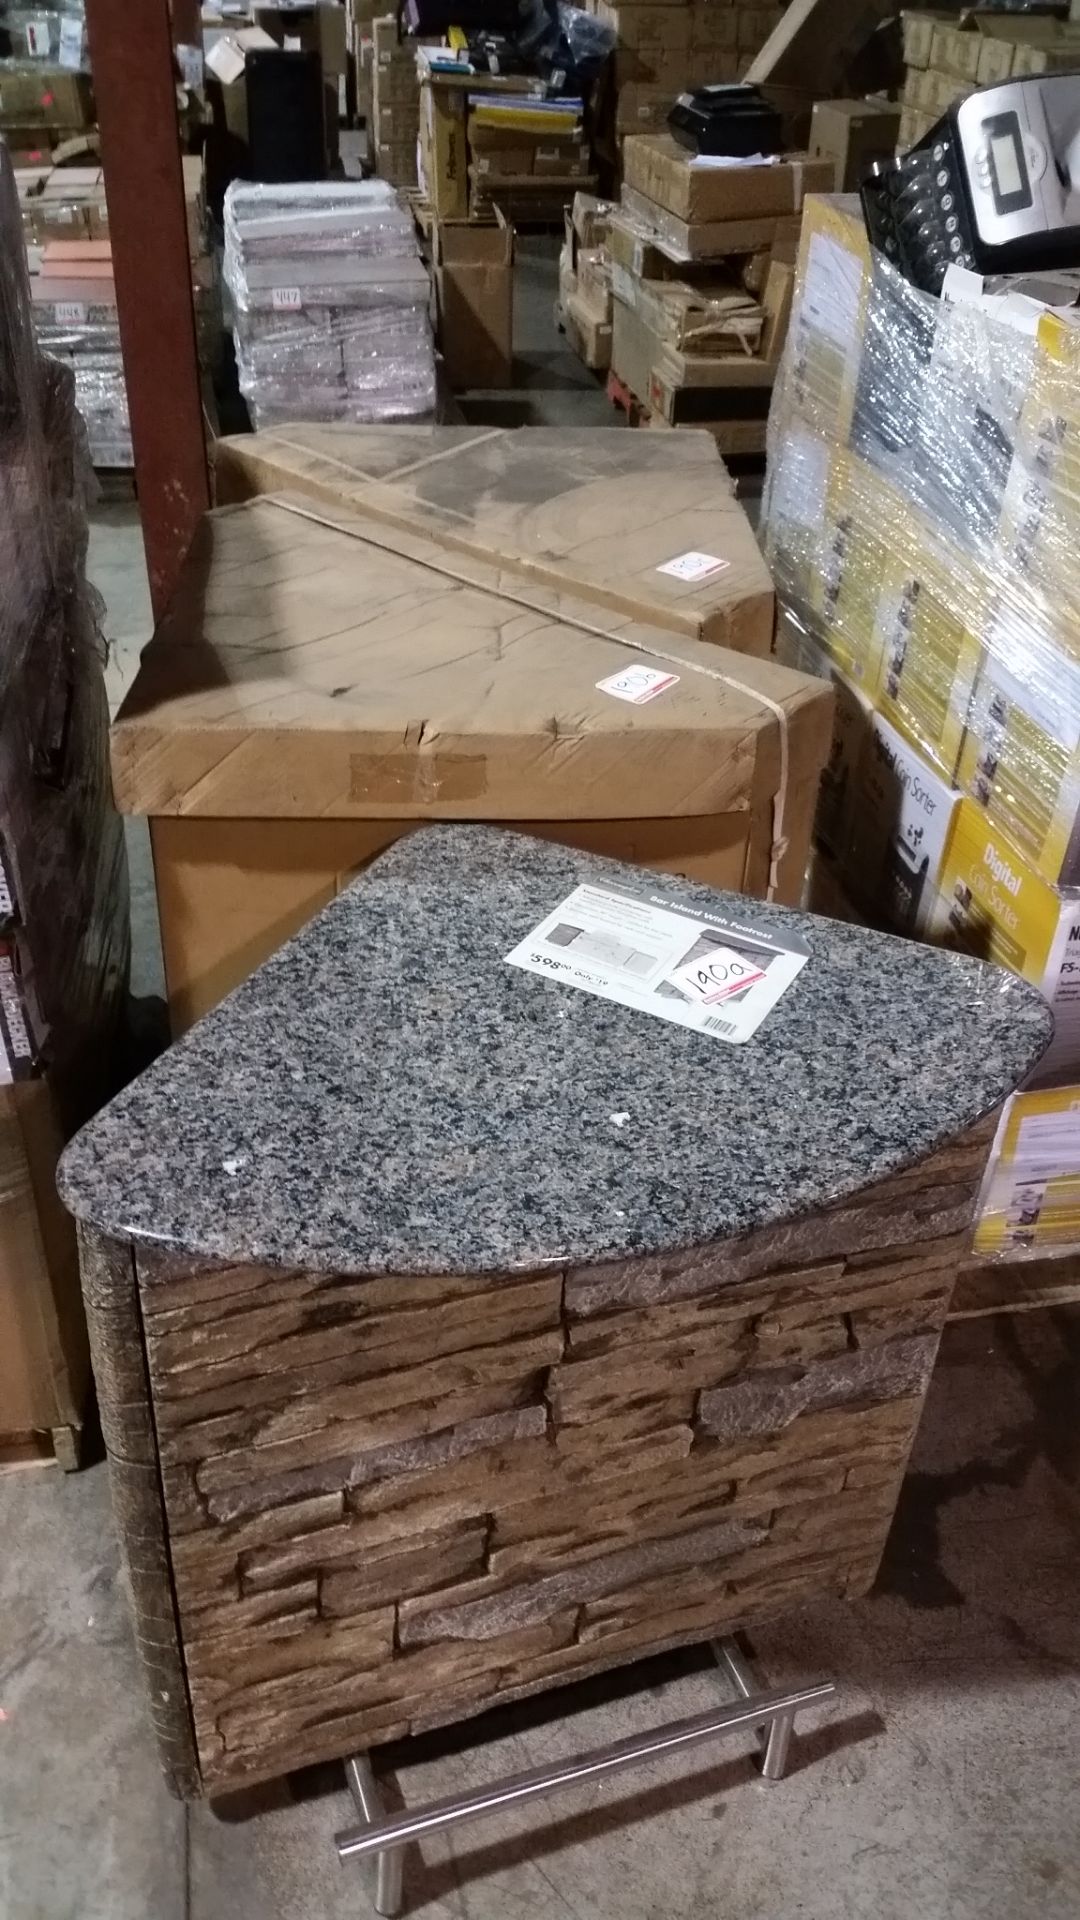 CHARMGLOW OUTDOOR 39"H BAR ISLAND C/W FOOT REST & GRANITE COUNTER TOP (IN BOX)